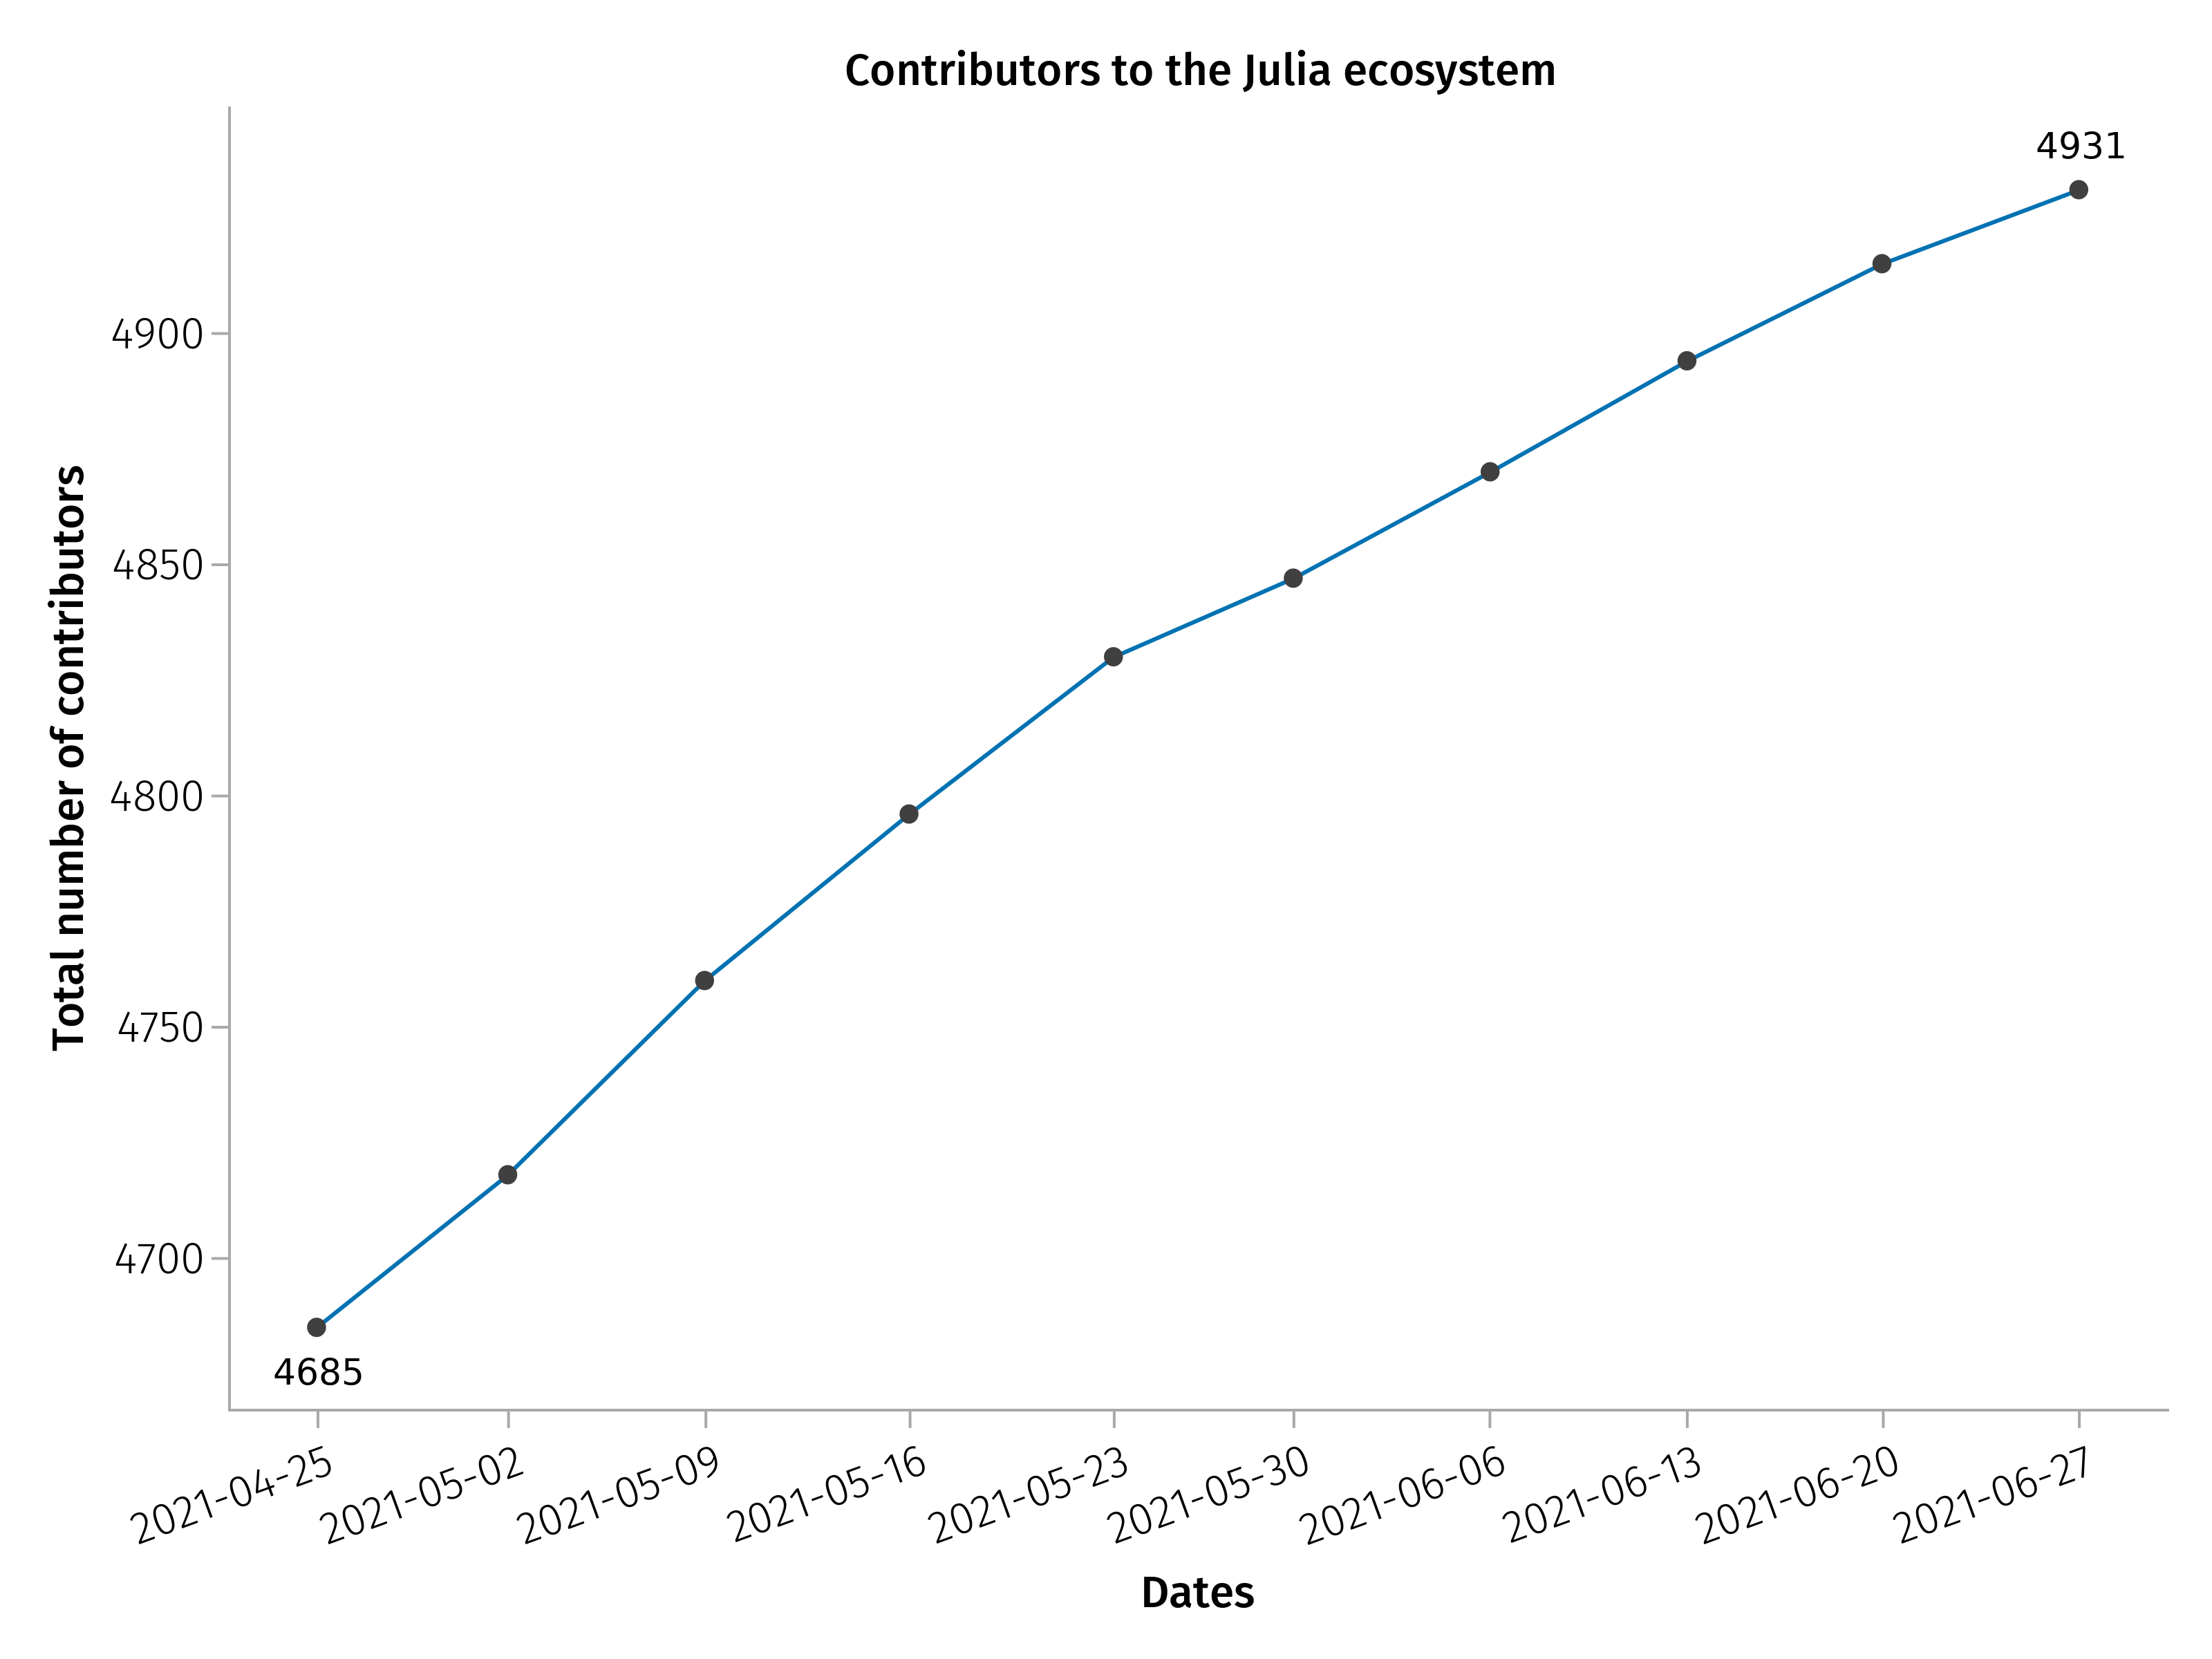 Trend of numbers of contributors